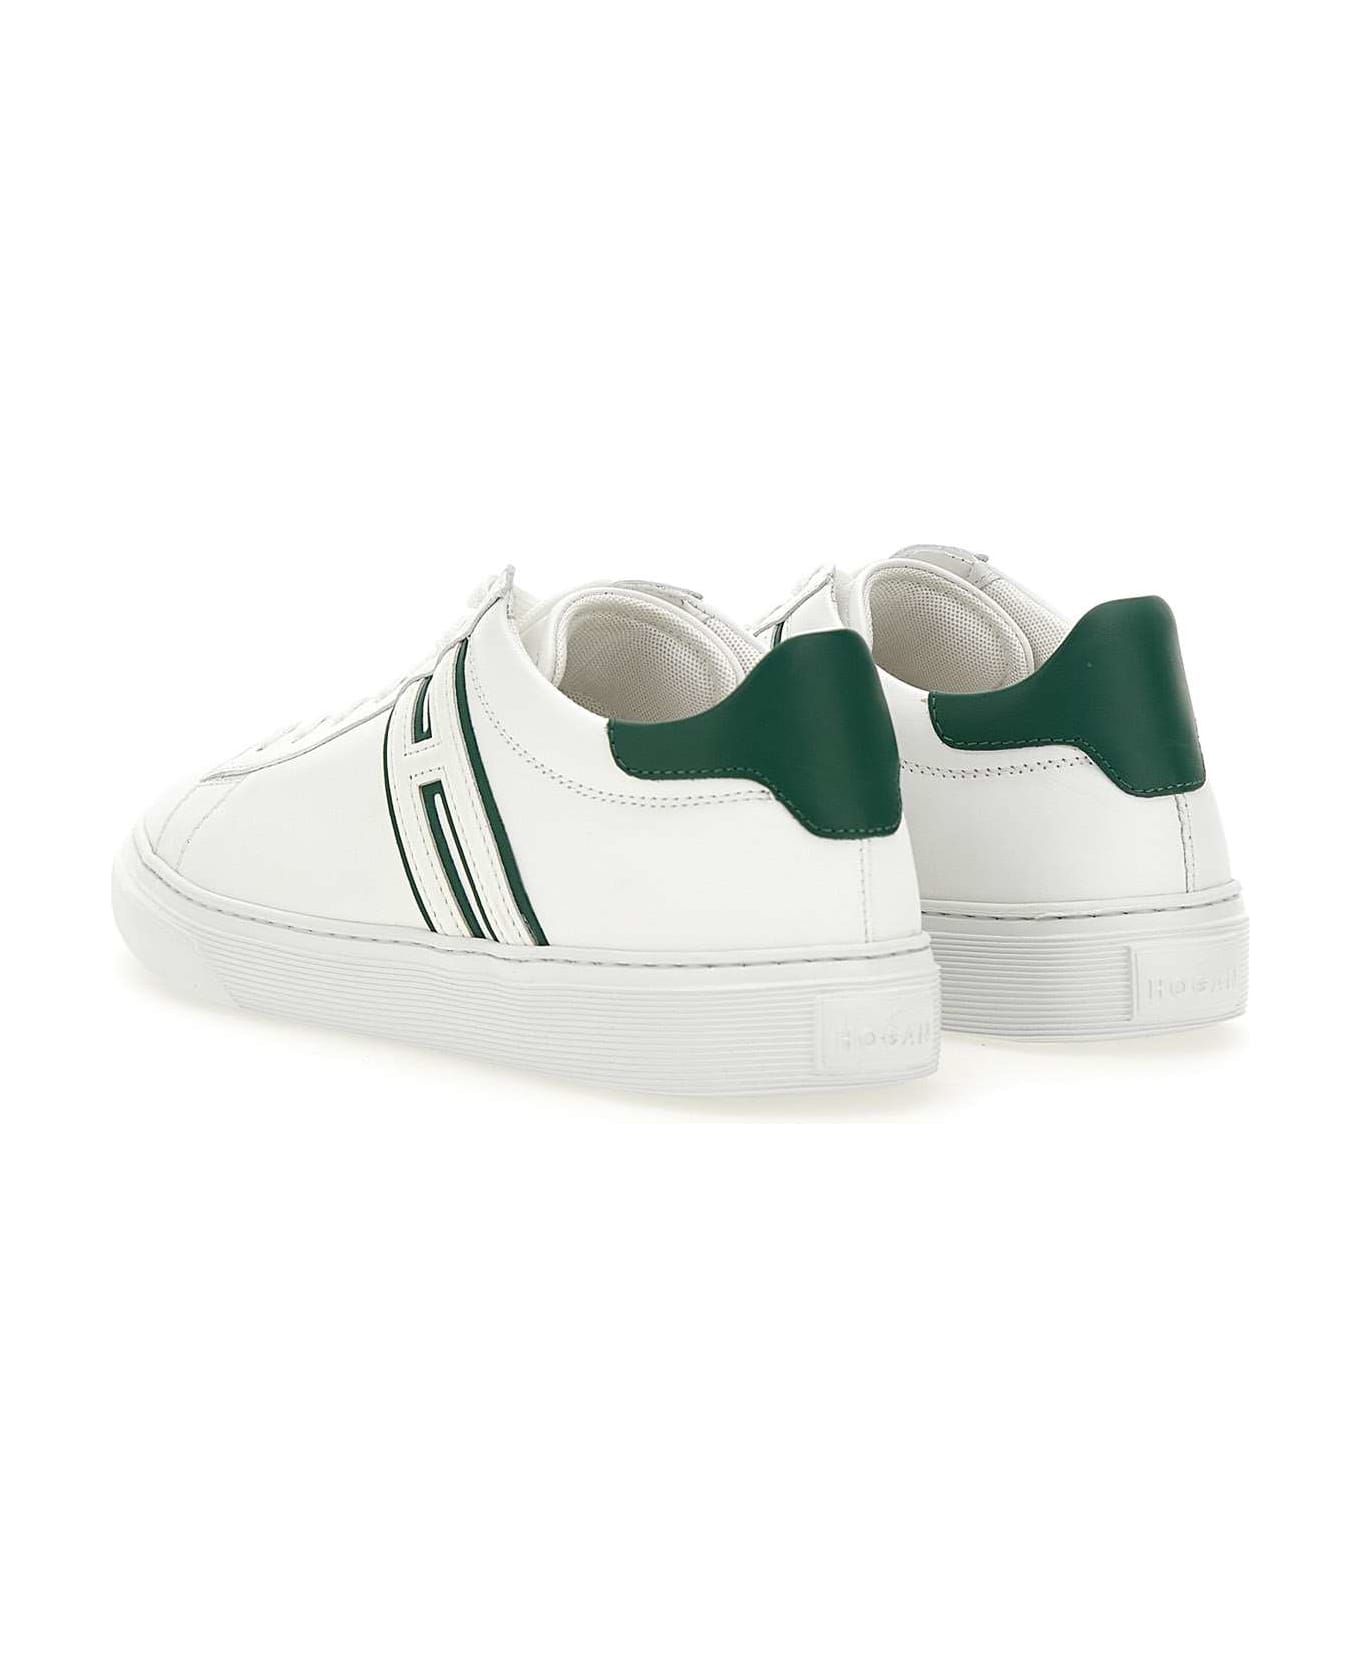 Hogan "h365" Leather Sneakers - WHITE